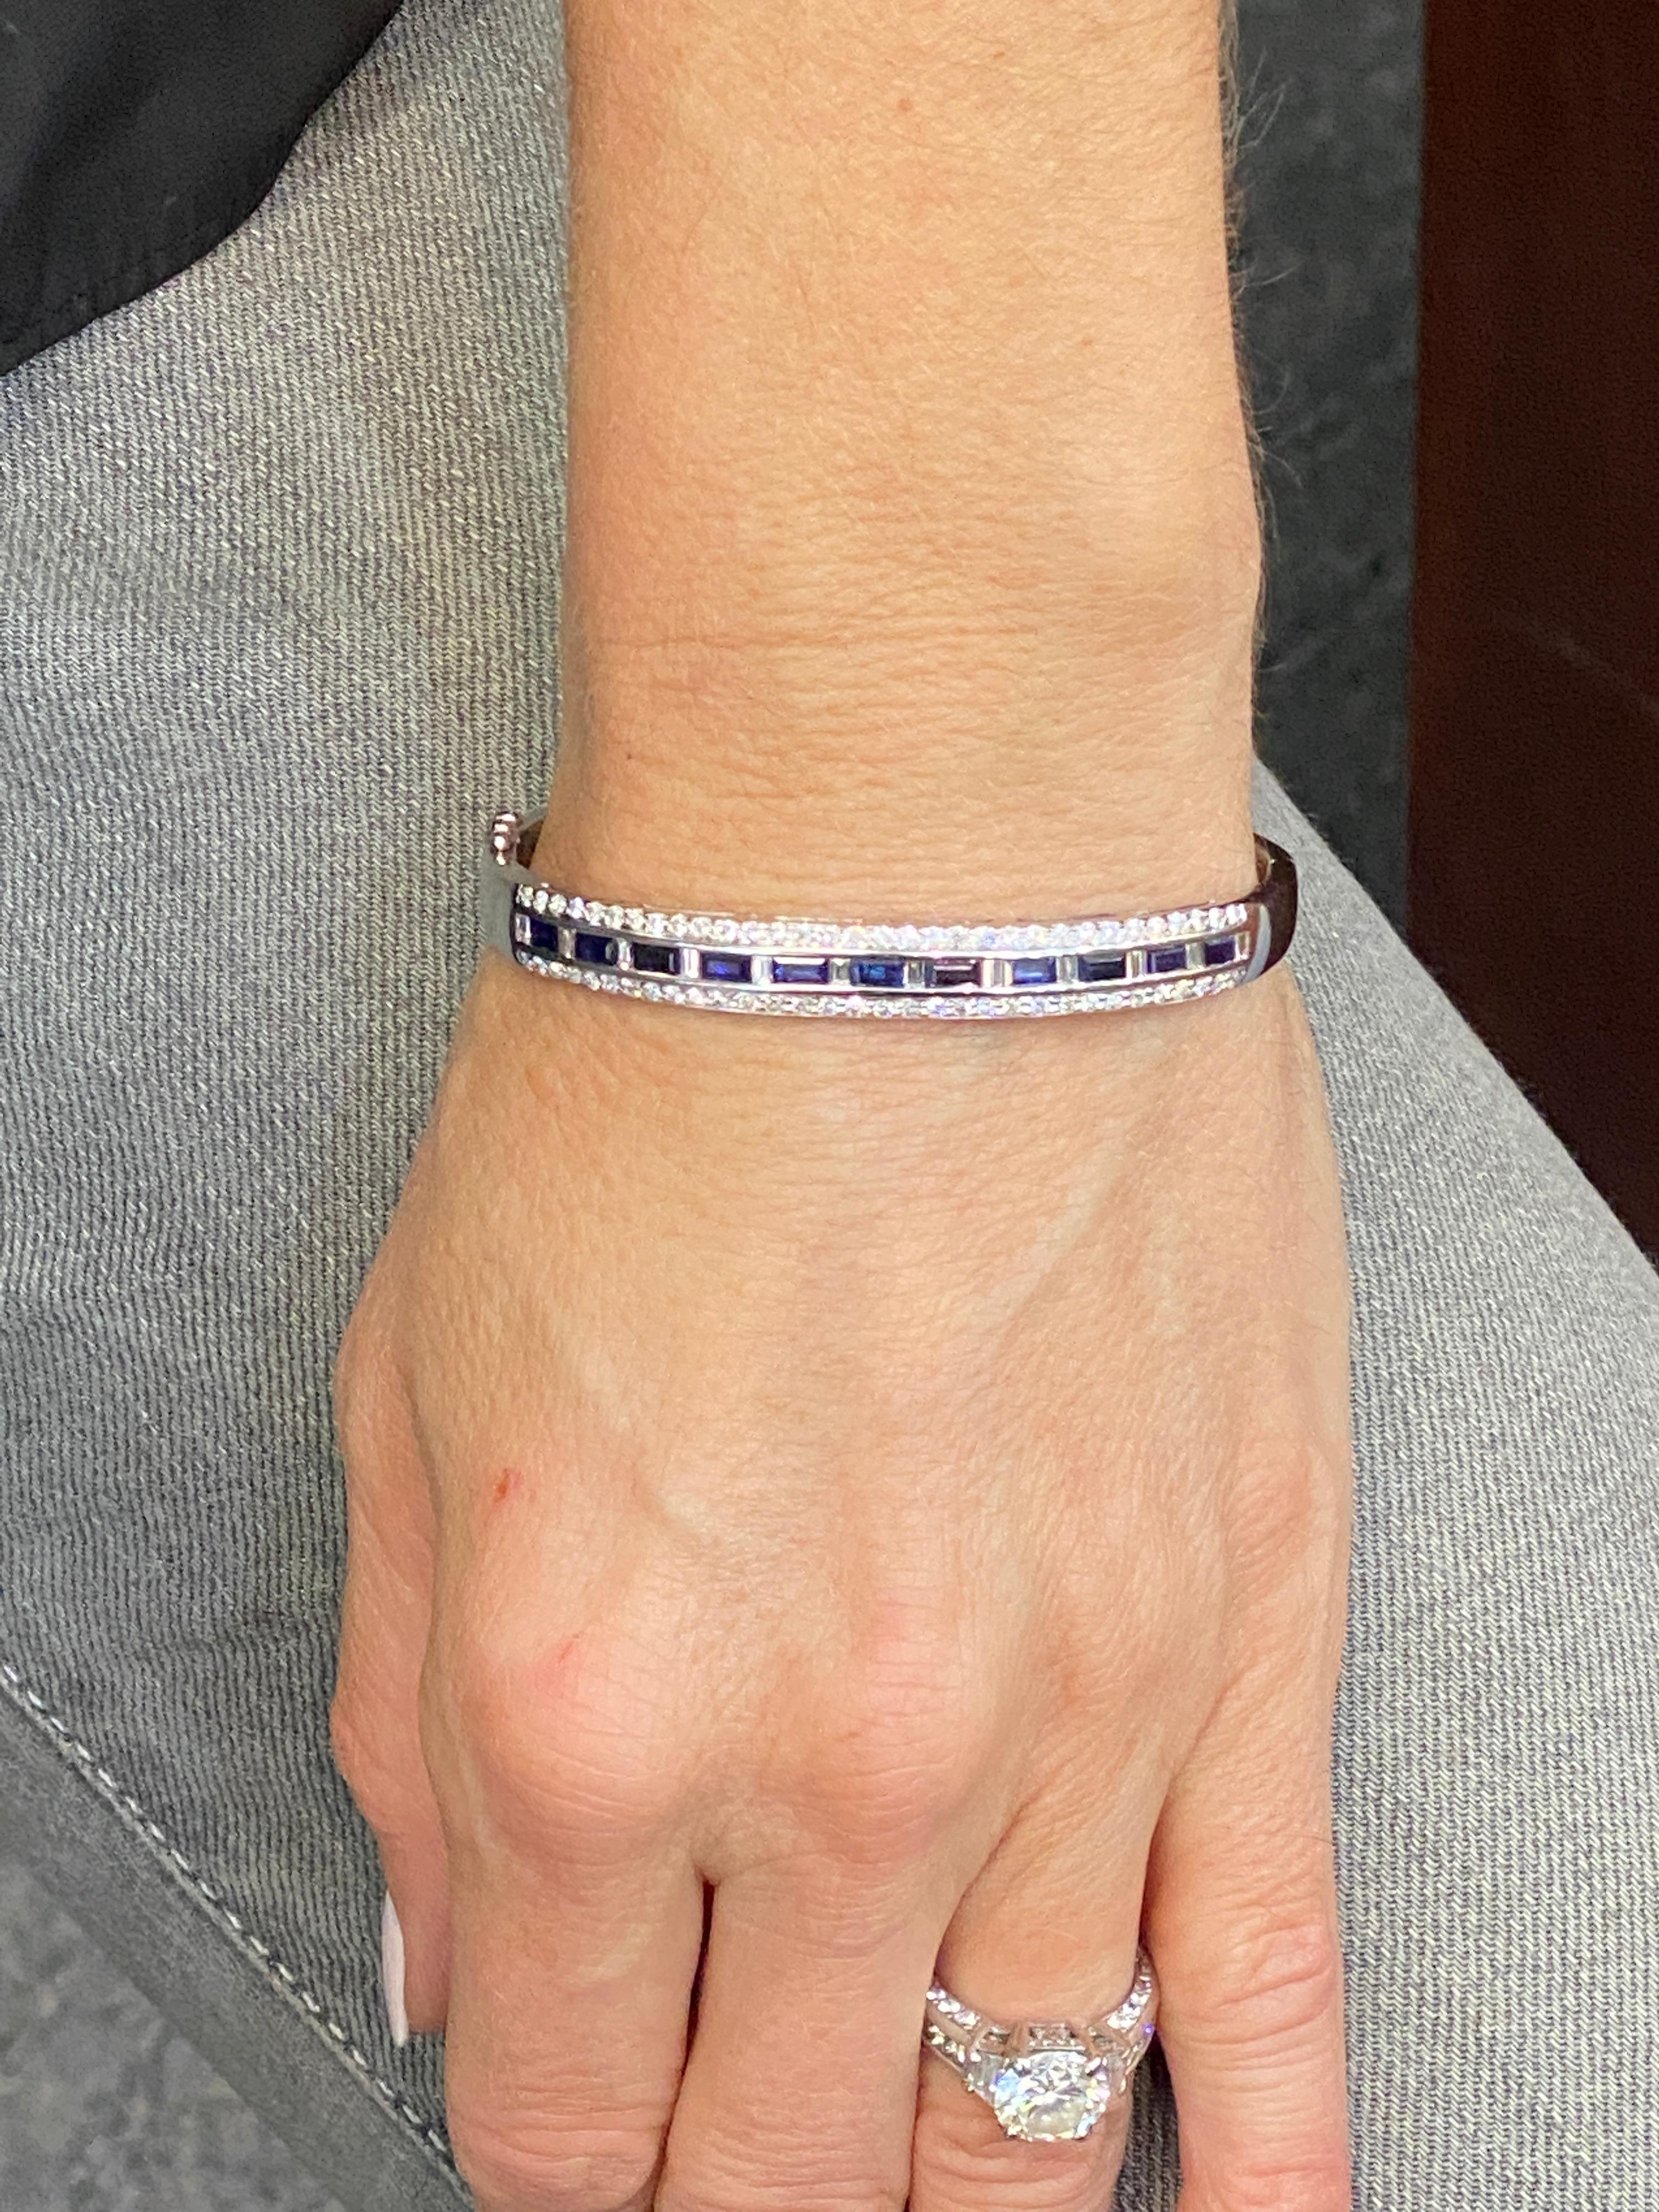 Diamond and natural blue sapphire bangle bracelet crafted in 18 karat white gold. The bangle features 76 round brilliant and baguette cut diamonds weighing approximately 1.12 carat total weight and 11 natural blue sapphires weighing approximately